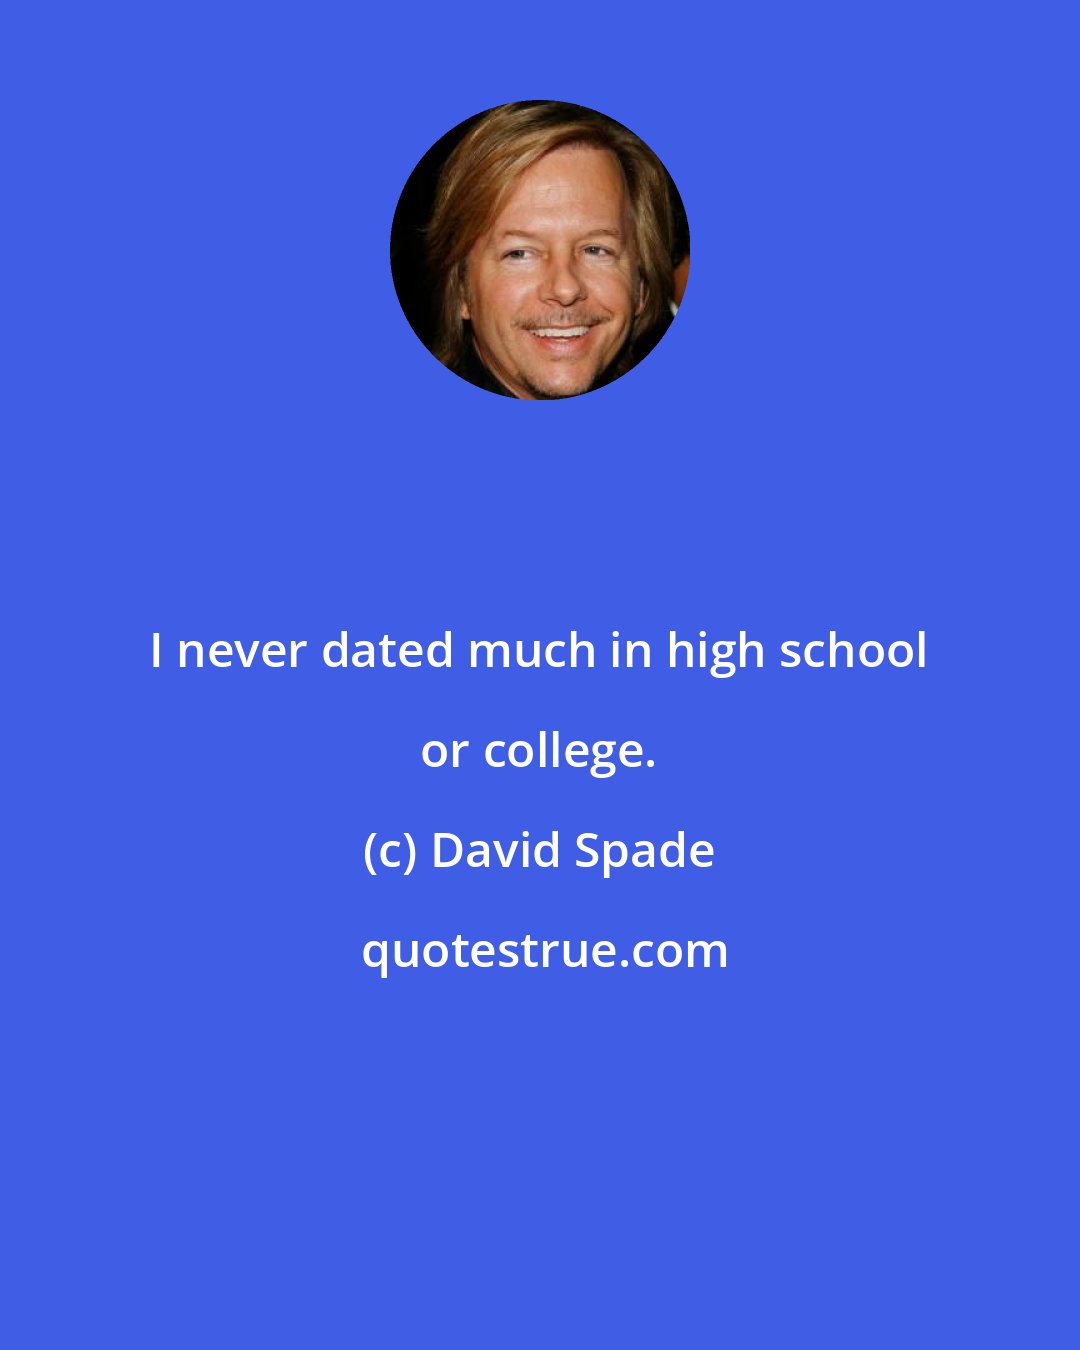 David Spade: I never dated much in high school or college.